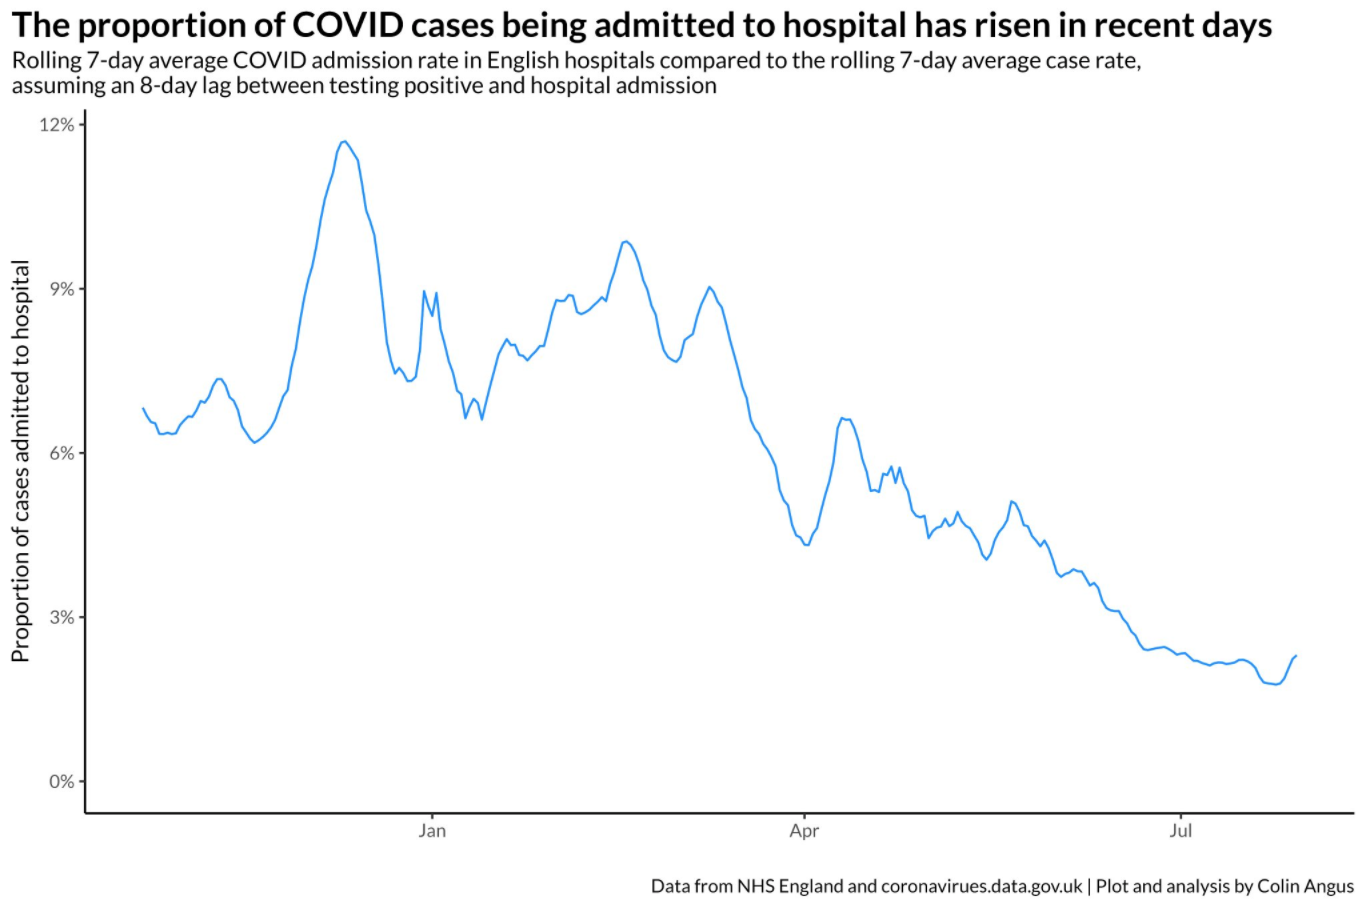 Hospitalisations from Covid cases are increasing